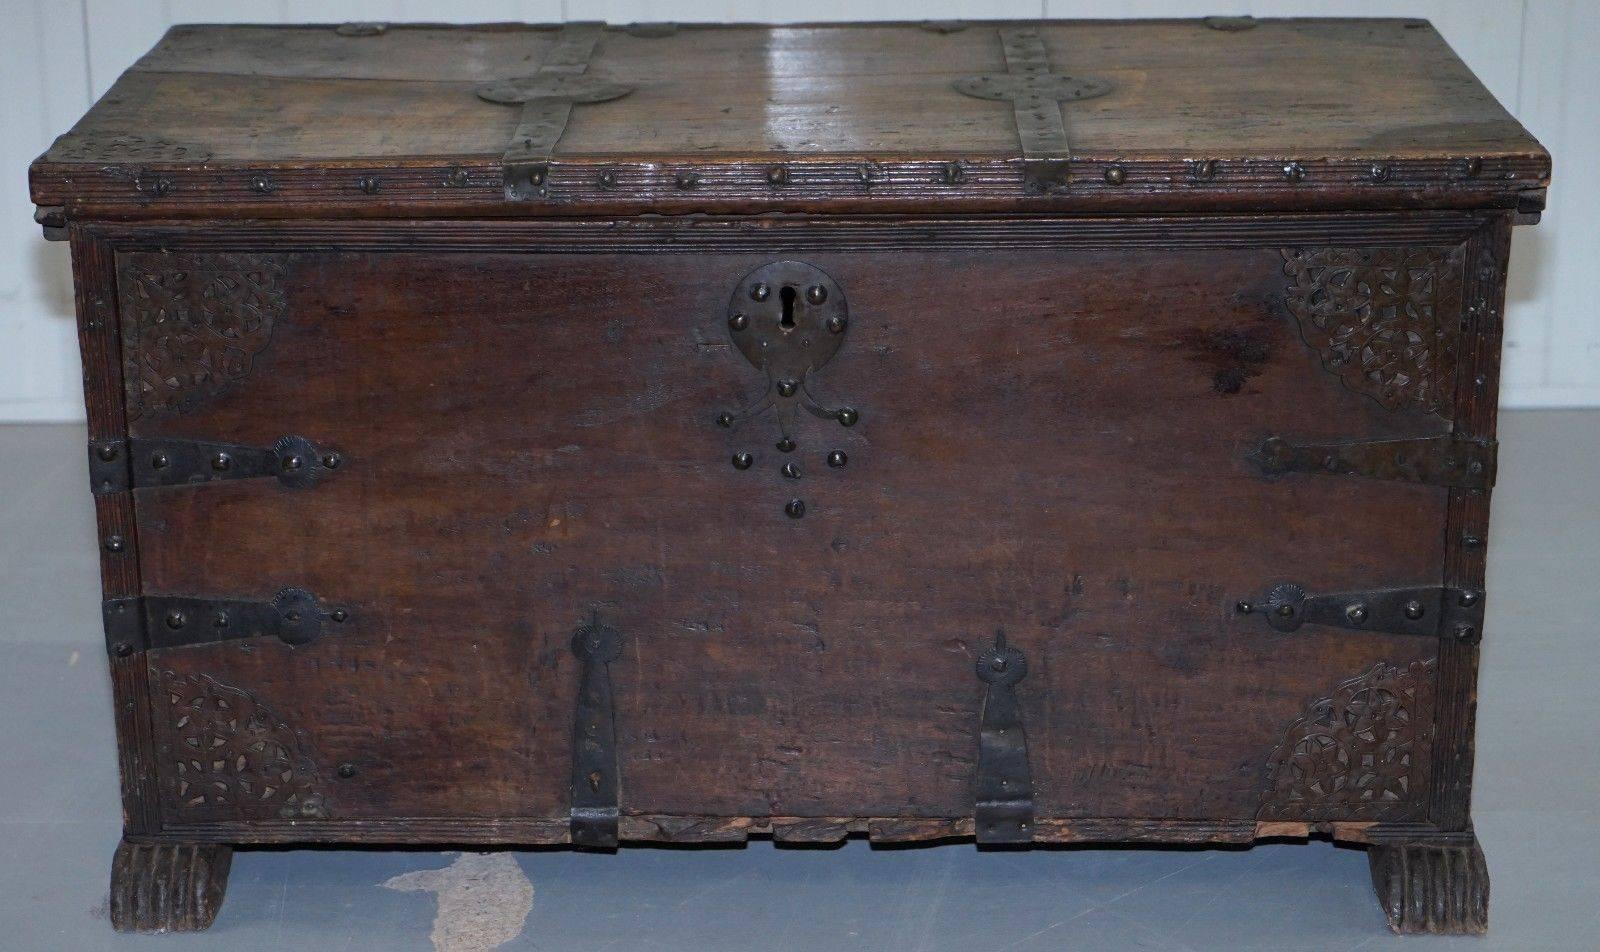 18th Century and Earlier Very Rare 17th Century Walnut Spanish Chest or Trunk Hand-Carved Iron Bound Lock